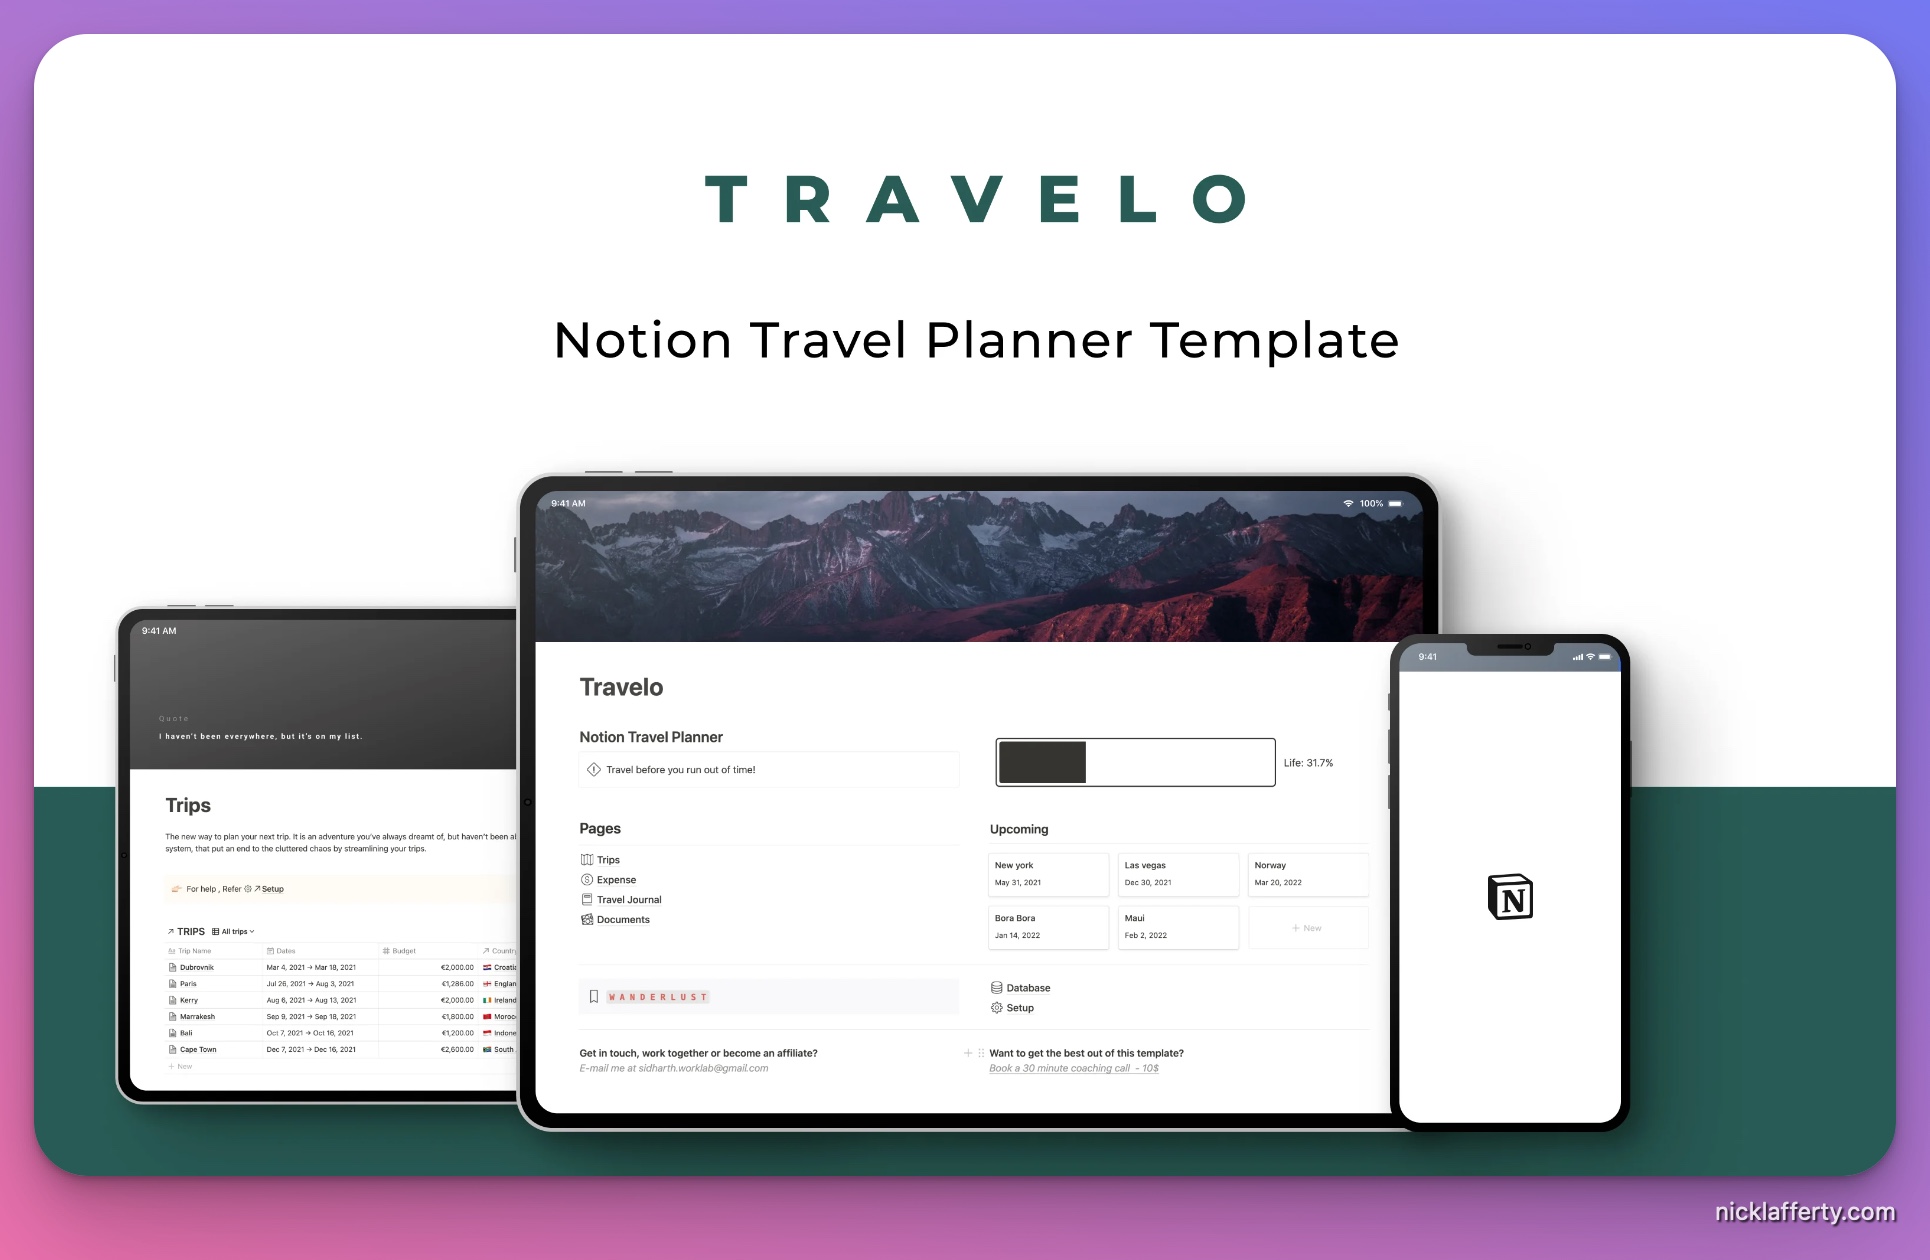 Travelo Notion Template